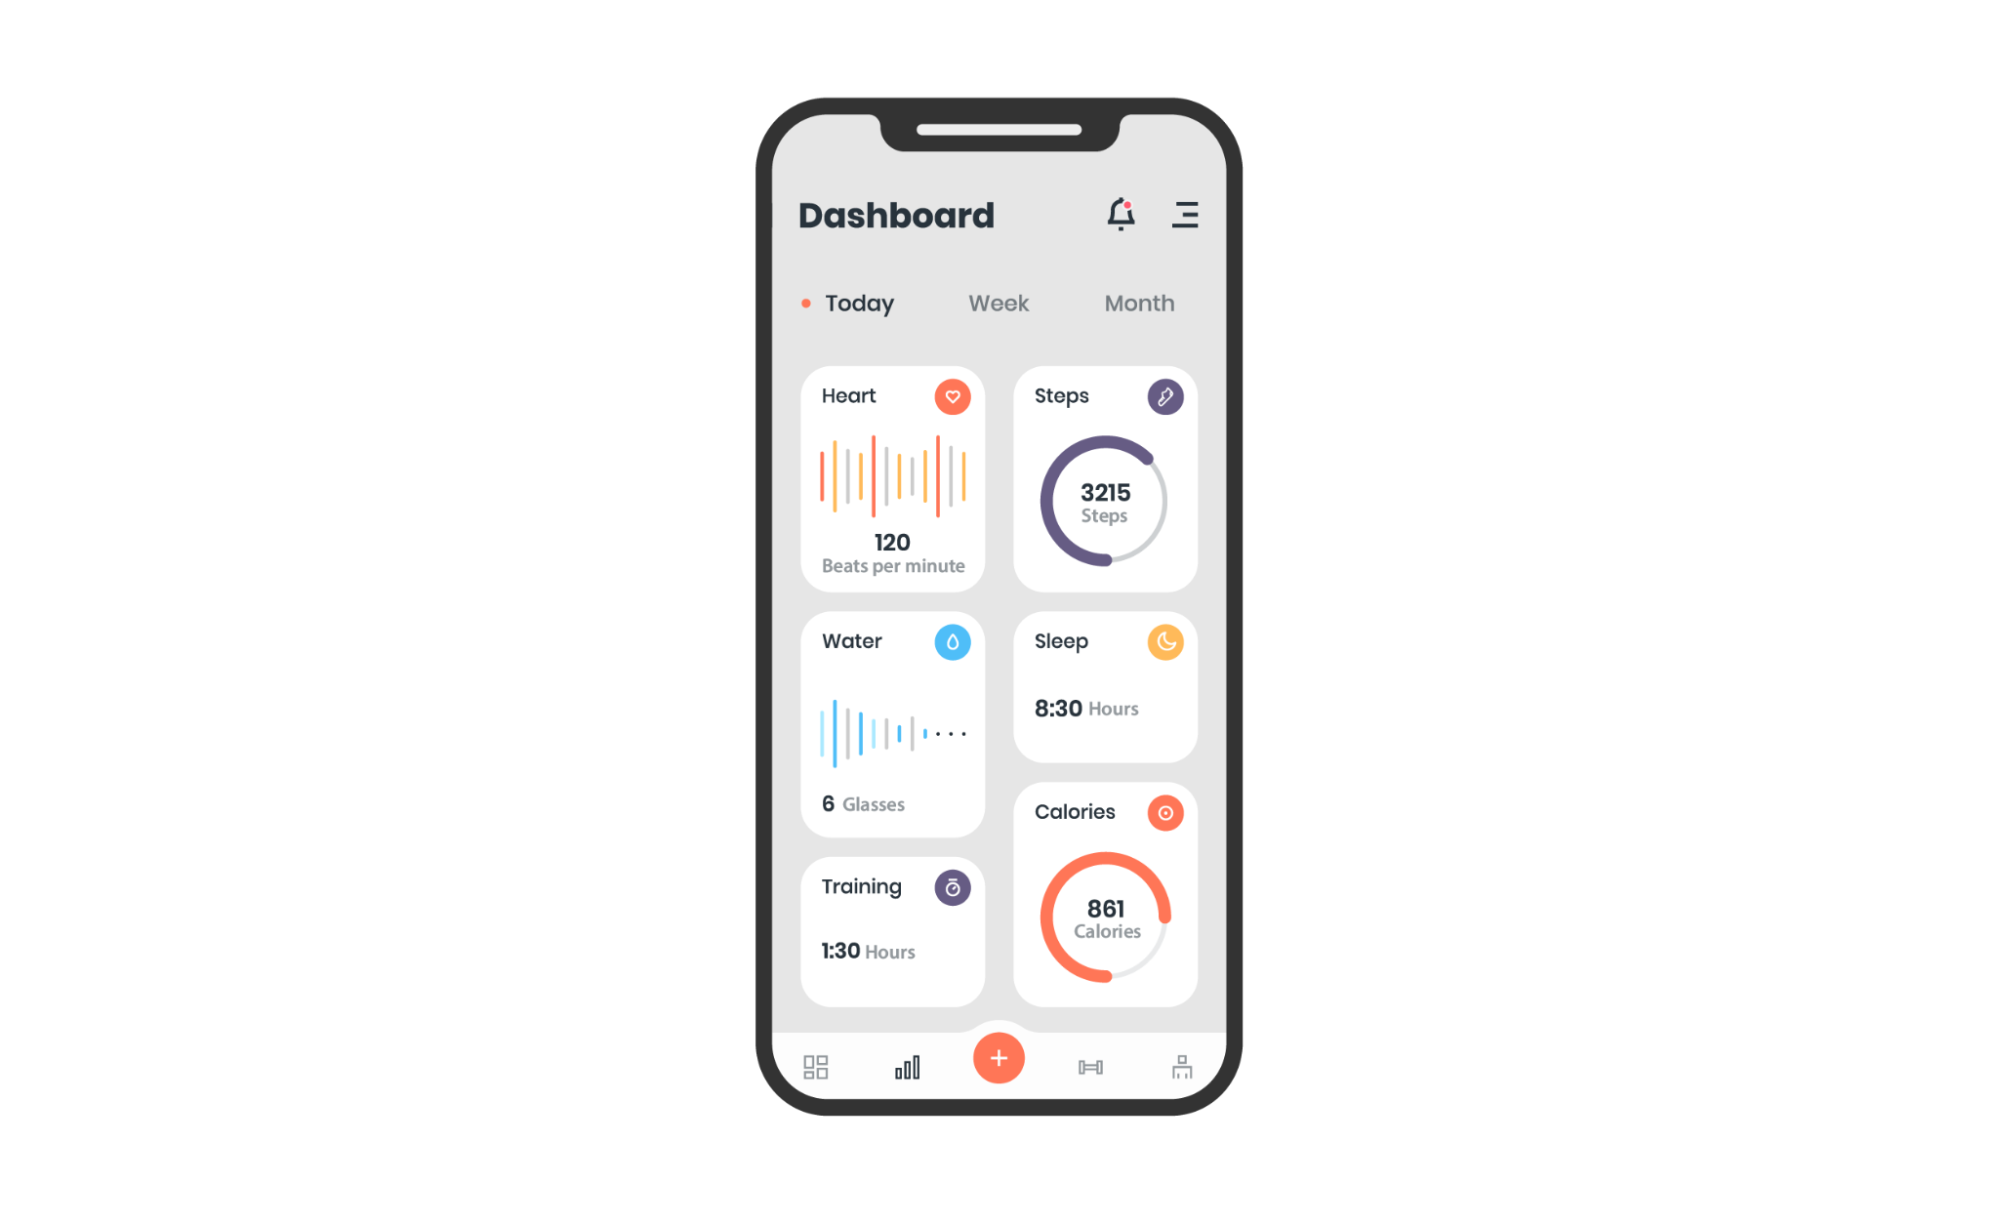 A picture shows a smartphone screen with an open fitness tracker app. On the app dashboard we can see the information about Zara’s heart rate, number of steps per day, water consumption, sleep quality, length of training and calories spent.